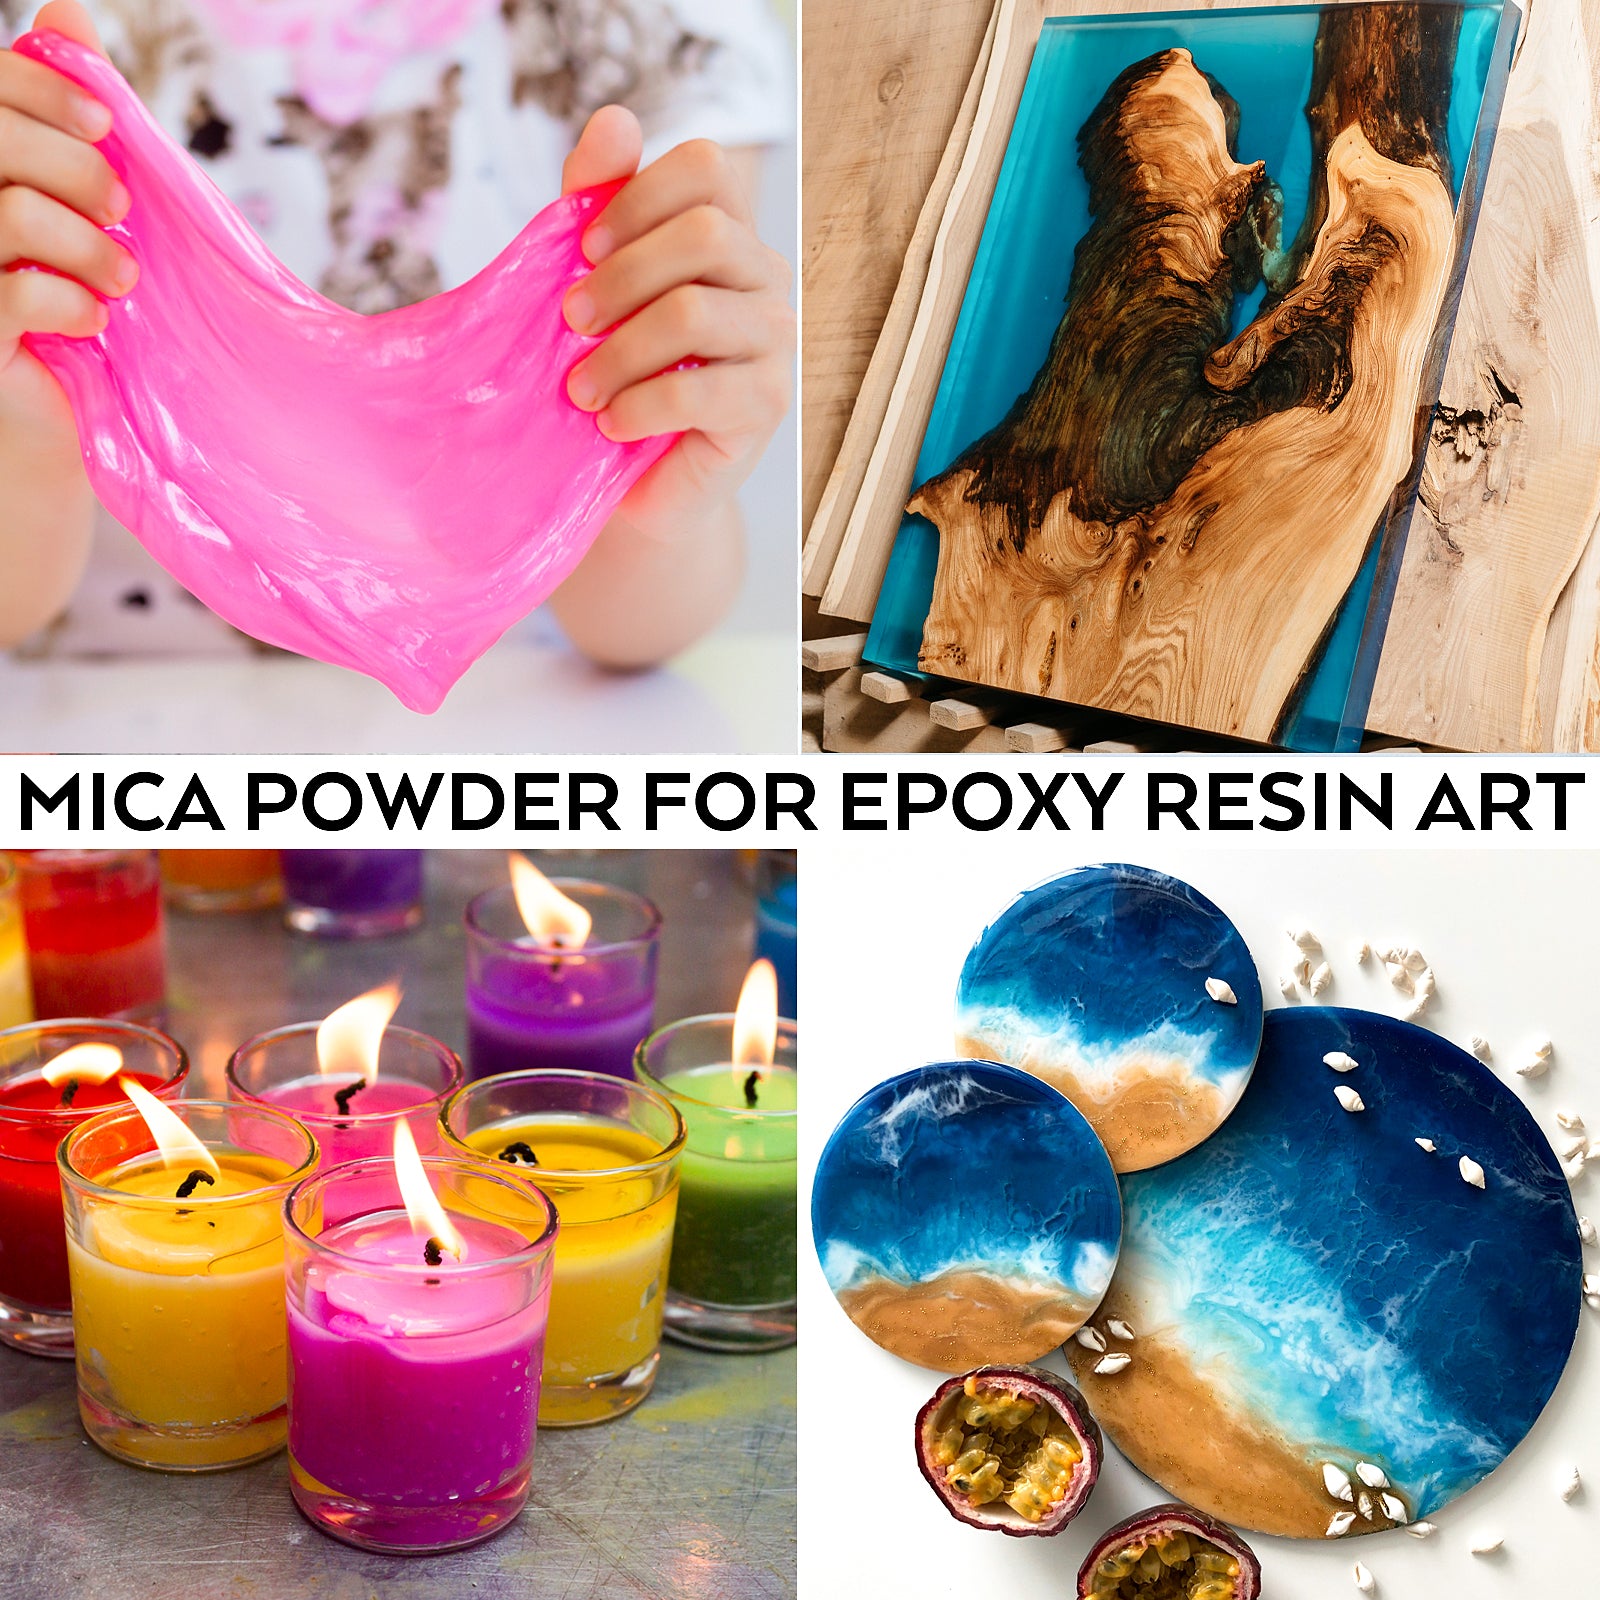 Mica Powder for Epoxy Resin, 30 Colors Mica Powder -Shimmery Pigment Powder for Soap Dye, Lip Gloss, Nail Polish, Makeup, Epoxy Resin, Candle Making